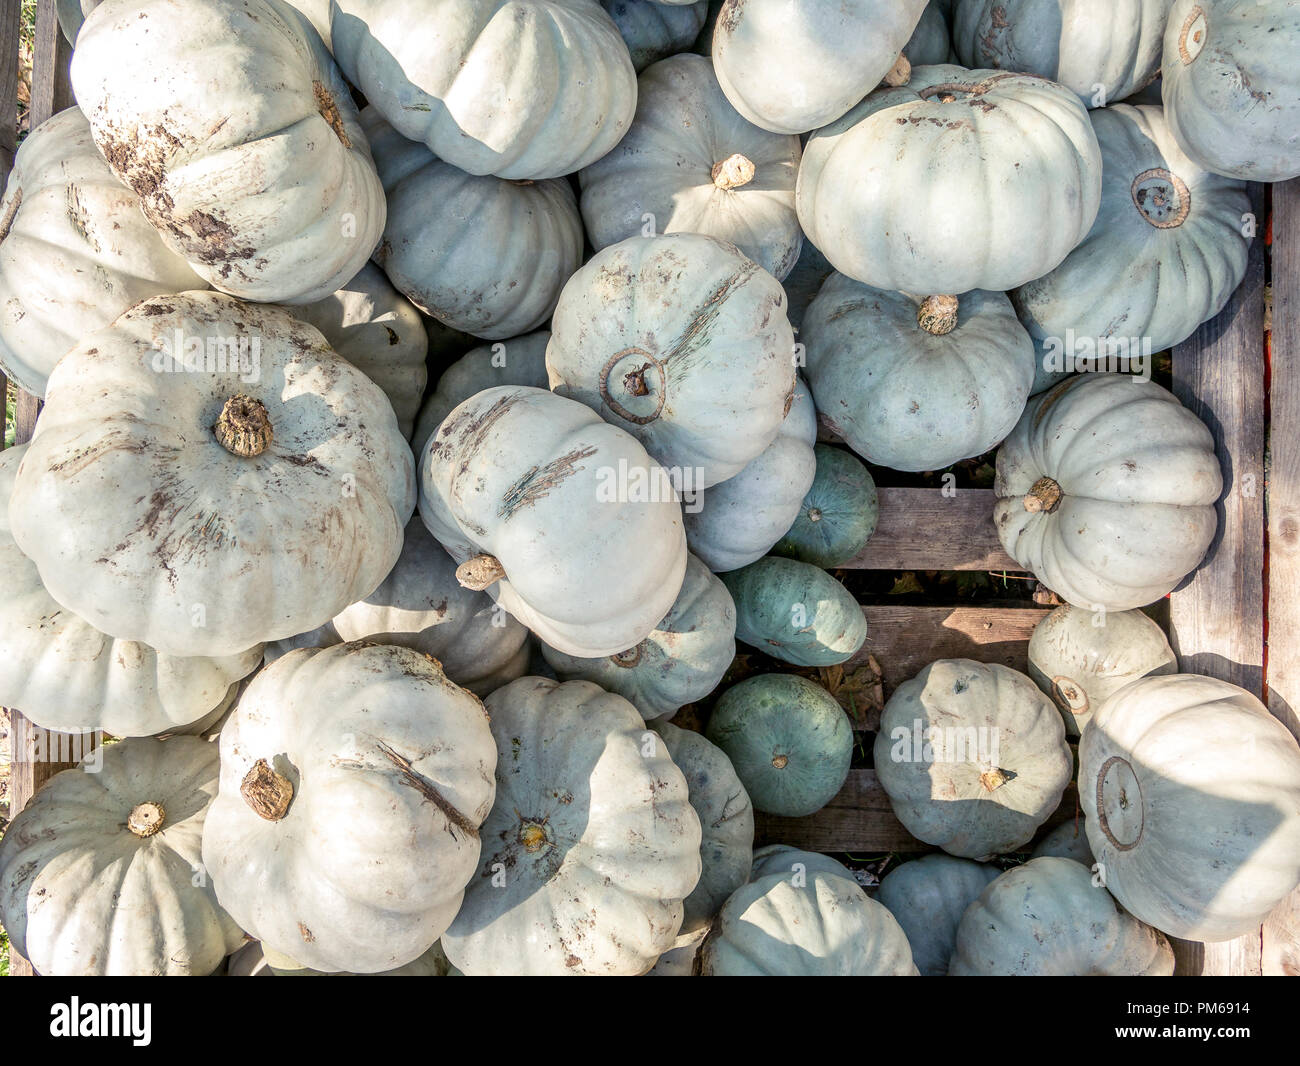 Image of close up view on crown-prince pumpkins Stock Photo